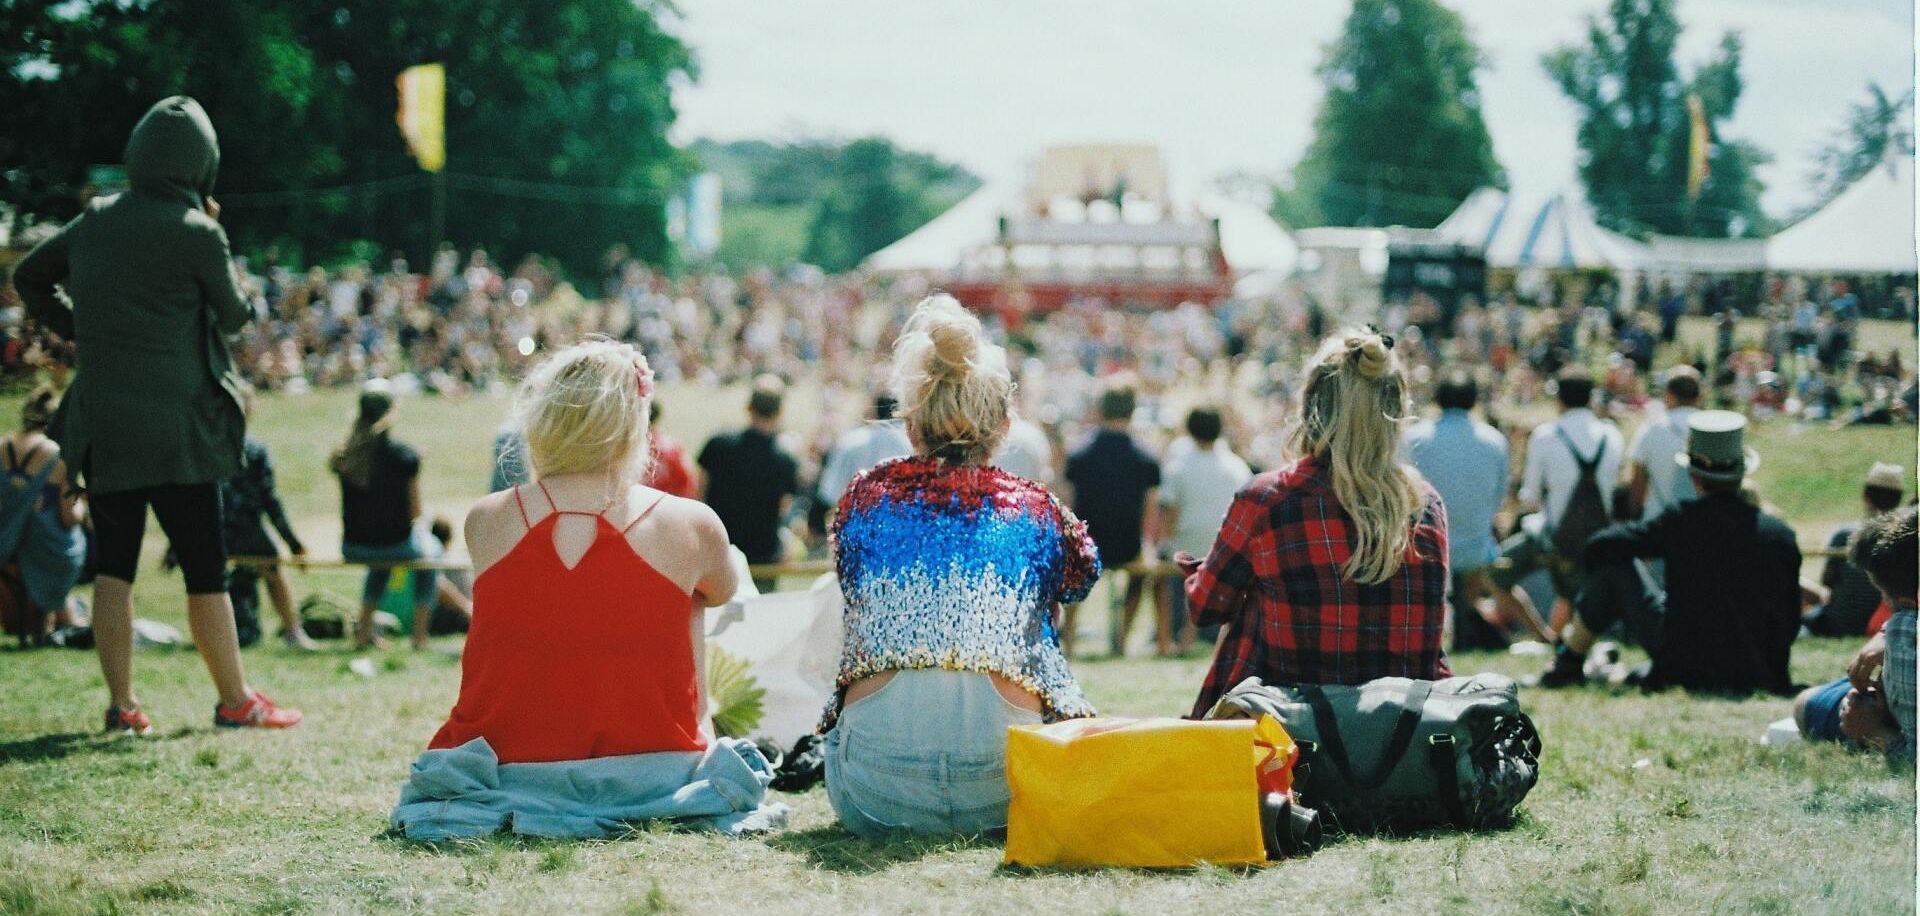 A shot from behind of three girls at a festival sat on the grass, looking over a busy festival ground that is blurred in the background.